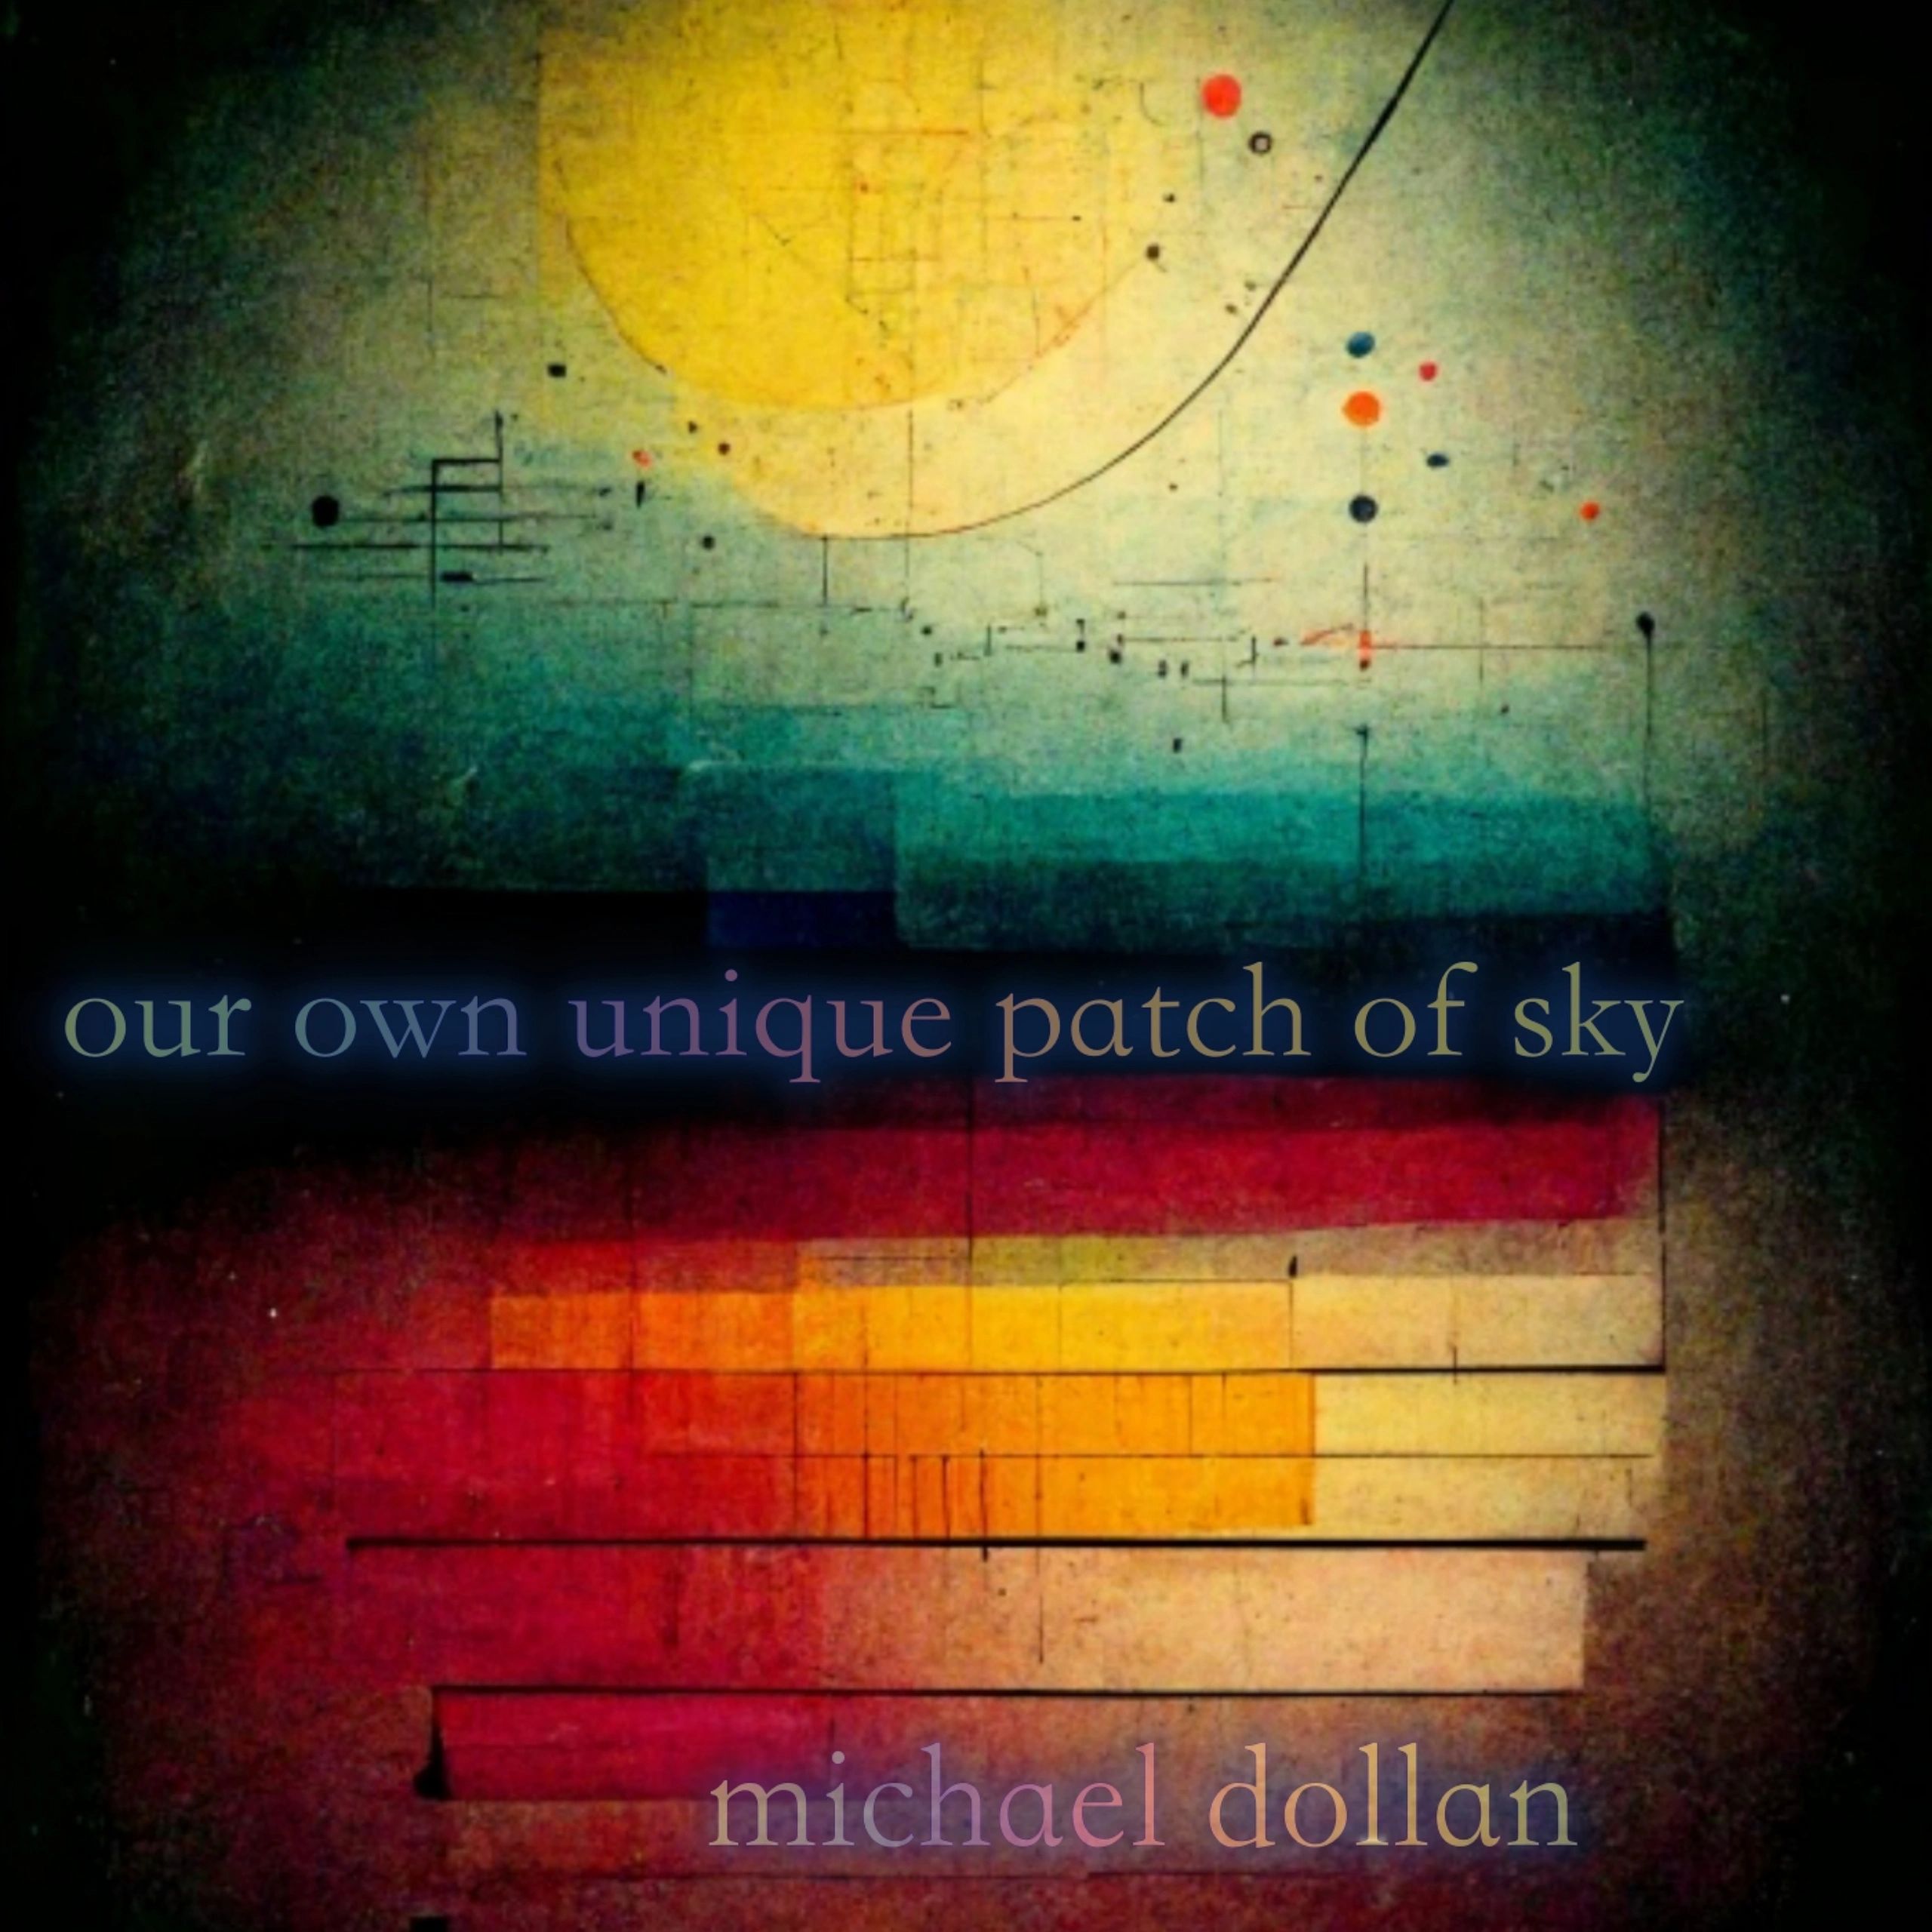 Detail fo the cover art - featuring the title 'our own unique patch of sky' and an abstract artwork.